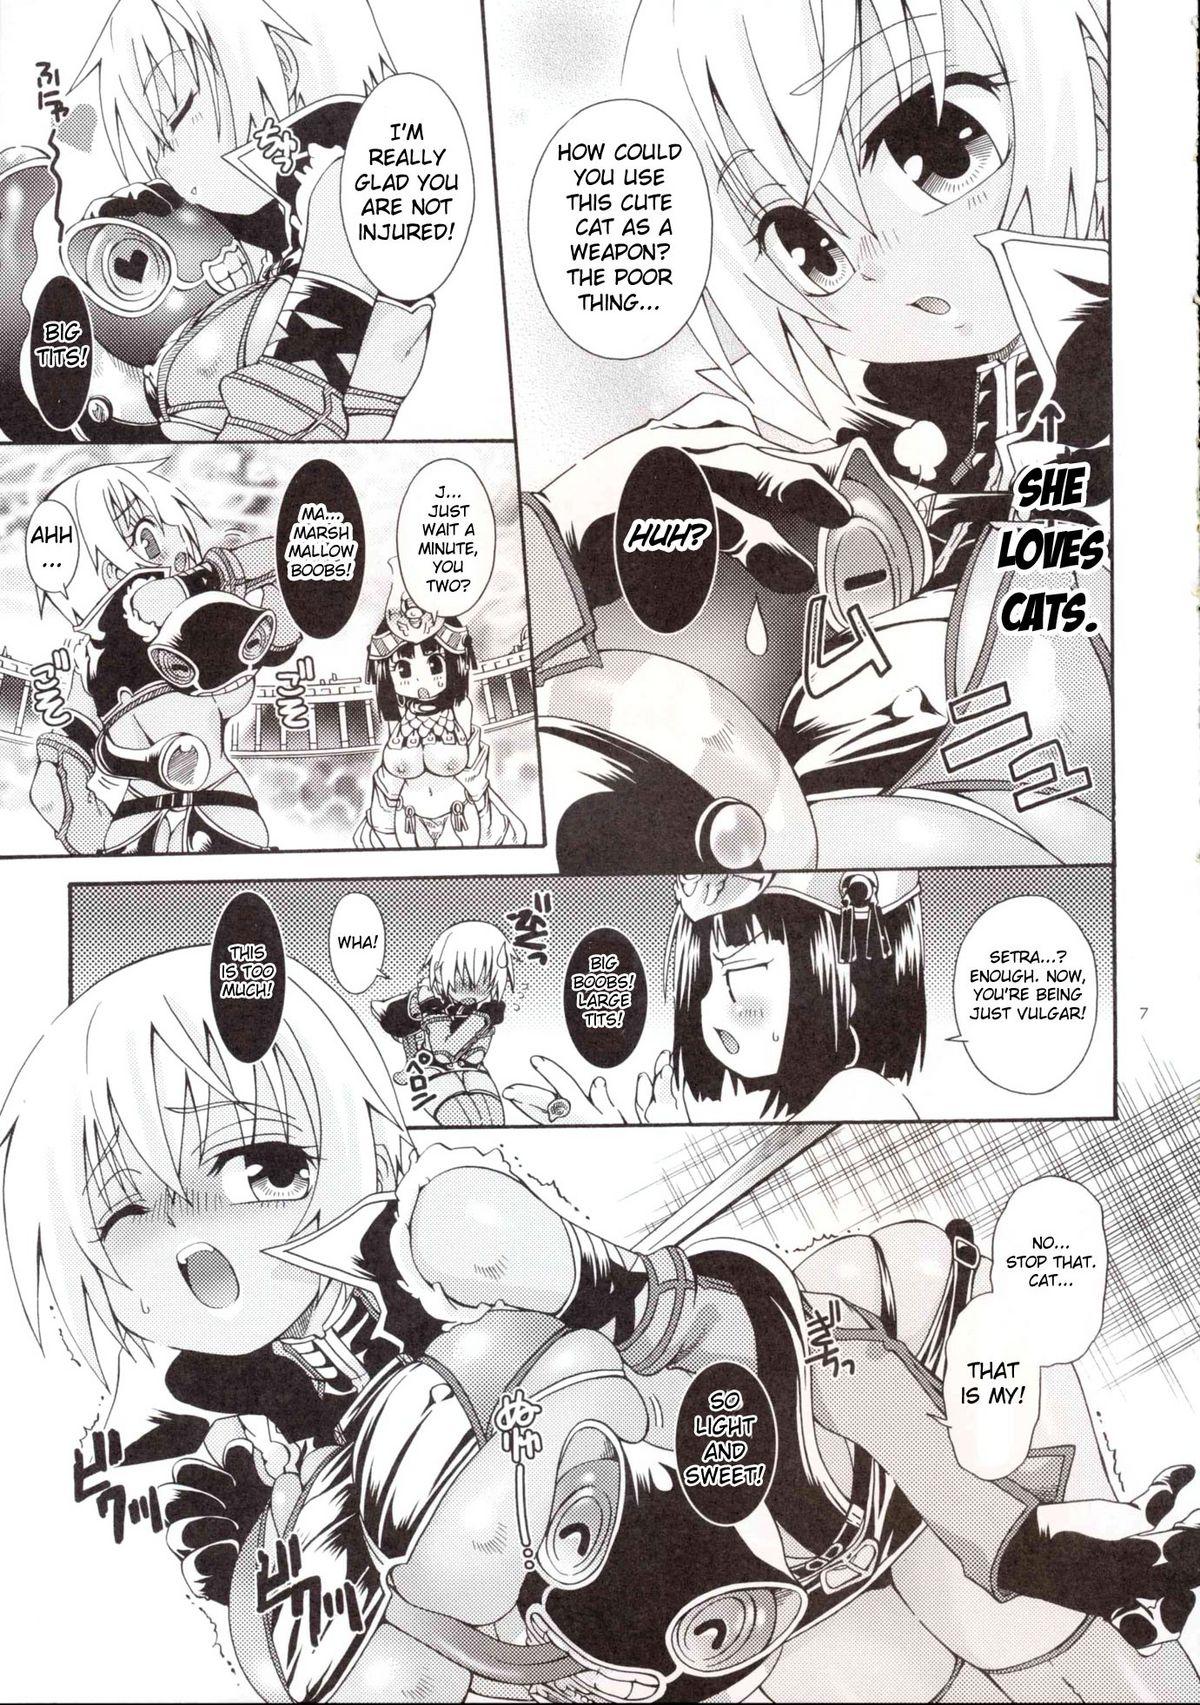 Lesbians Cat Fight Over Drive - Queens blade Big Cock - Page 6